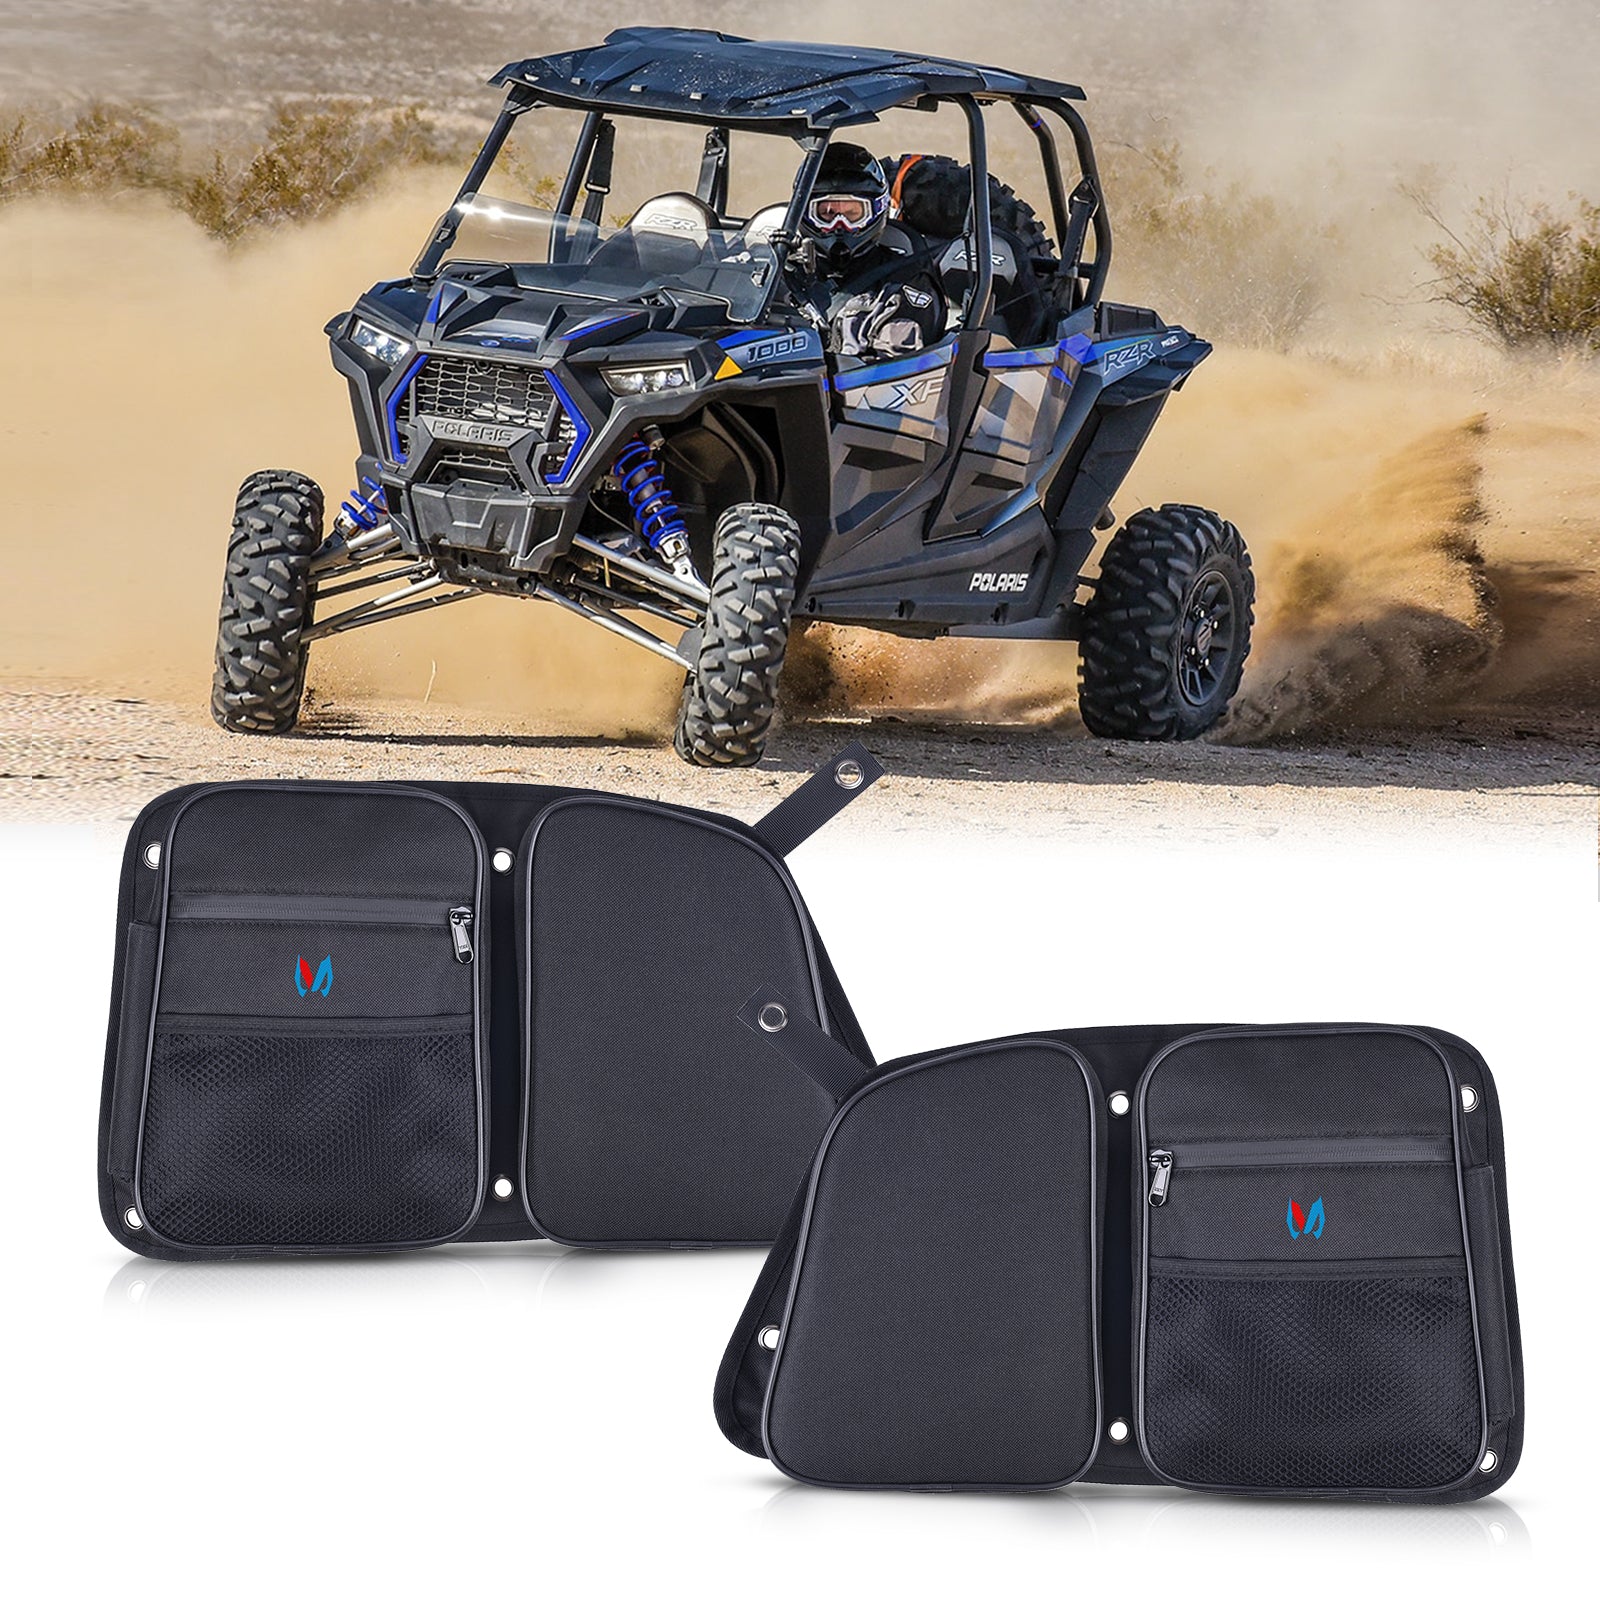 RZR Rear Door Bags Passenger and Driver Side Storage Bag Set with Knee Protection Pad & Cup Holder